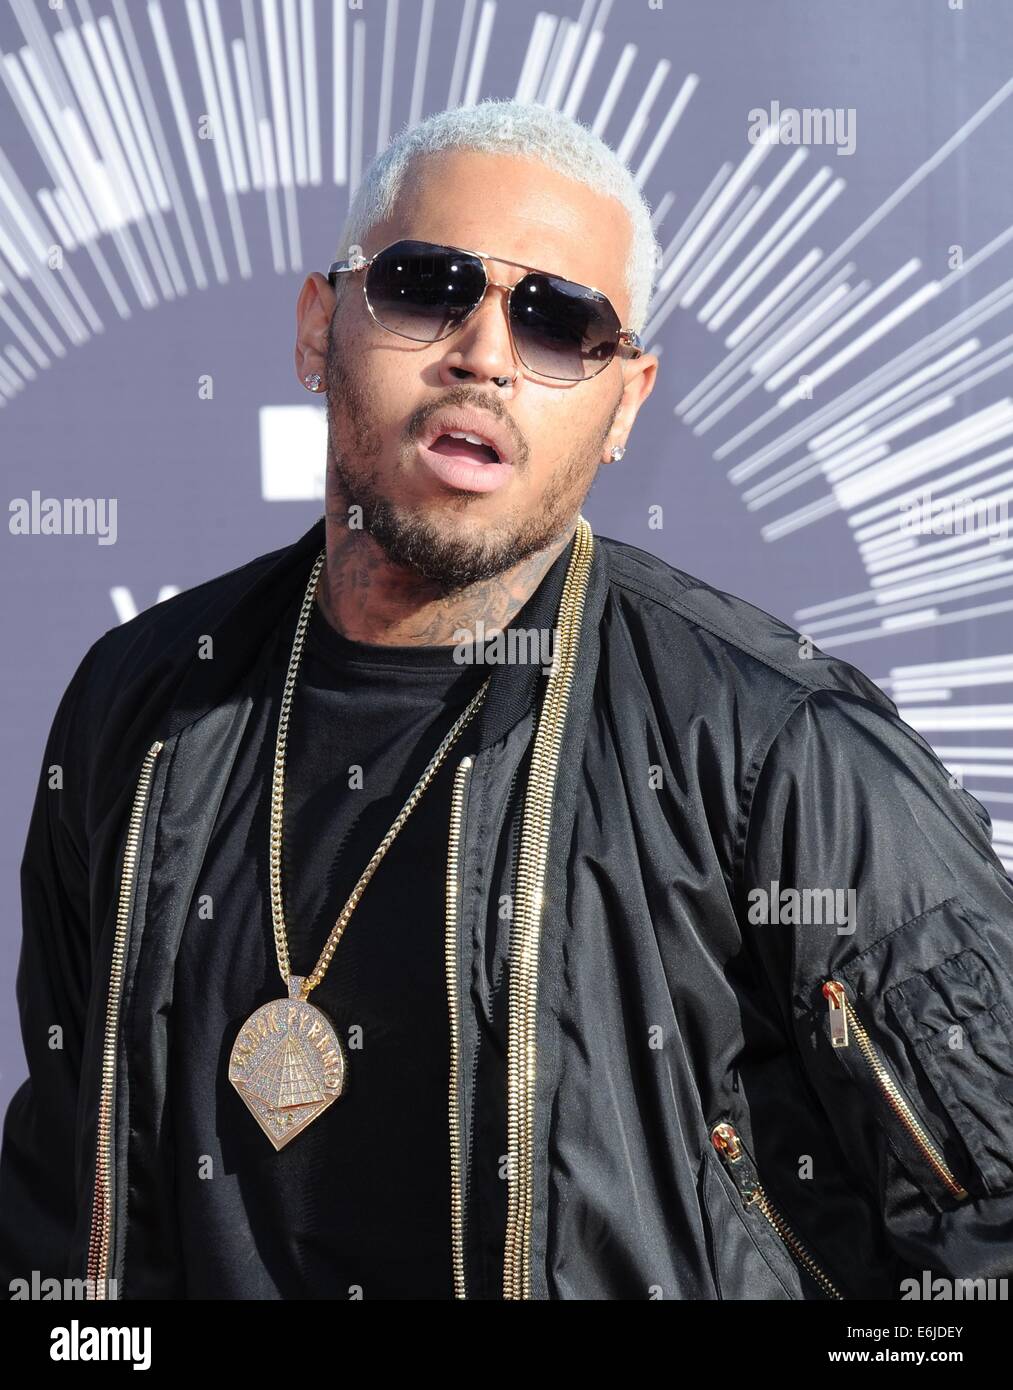 Inglewood, CA. 24th Aug, 2014. Chris Brown at arrivals for MTV Video Music Awards (VMA) 2014 - Part 2, The Forum, Inglewood, CA August 24, 2014. Credit:  Dee Cercone/Everett Collection/Alamy Live News Stock Photo